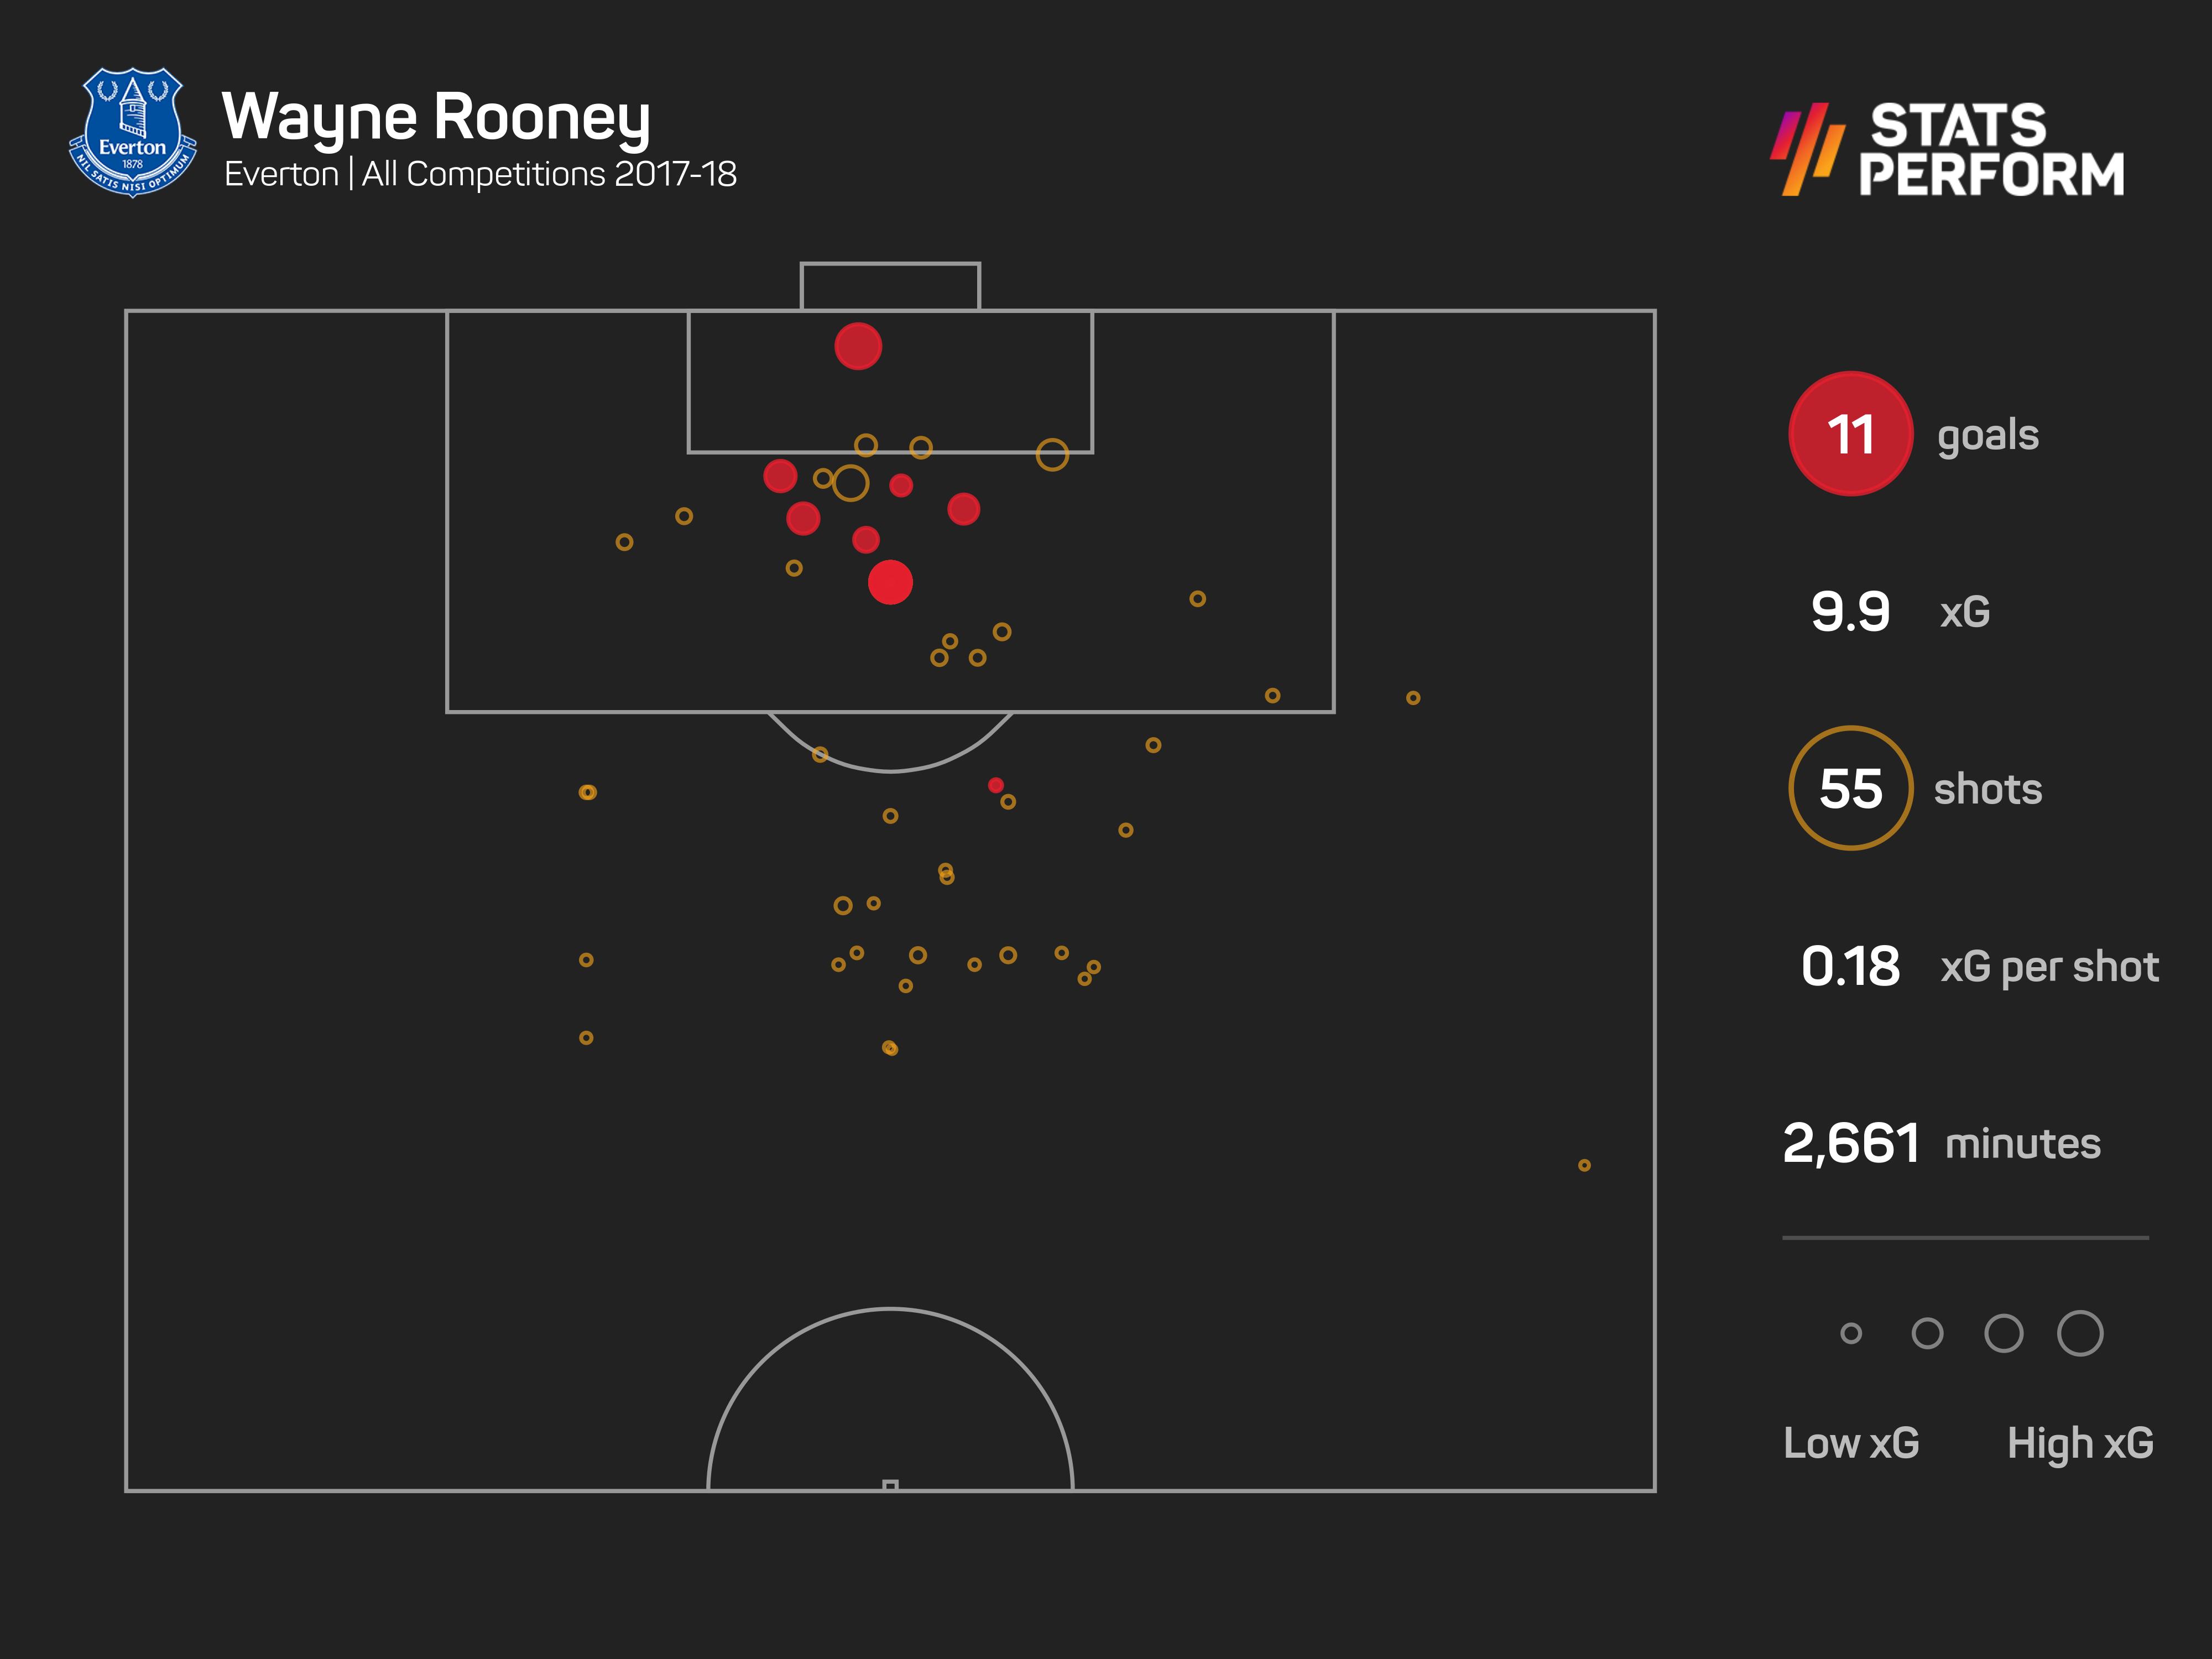 Wayne Rooney scored 11 goals in his second spell at Everton as a player